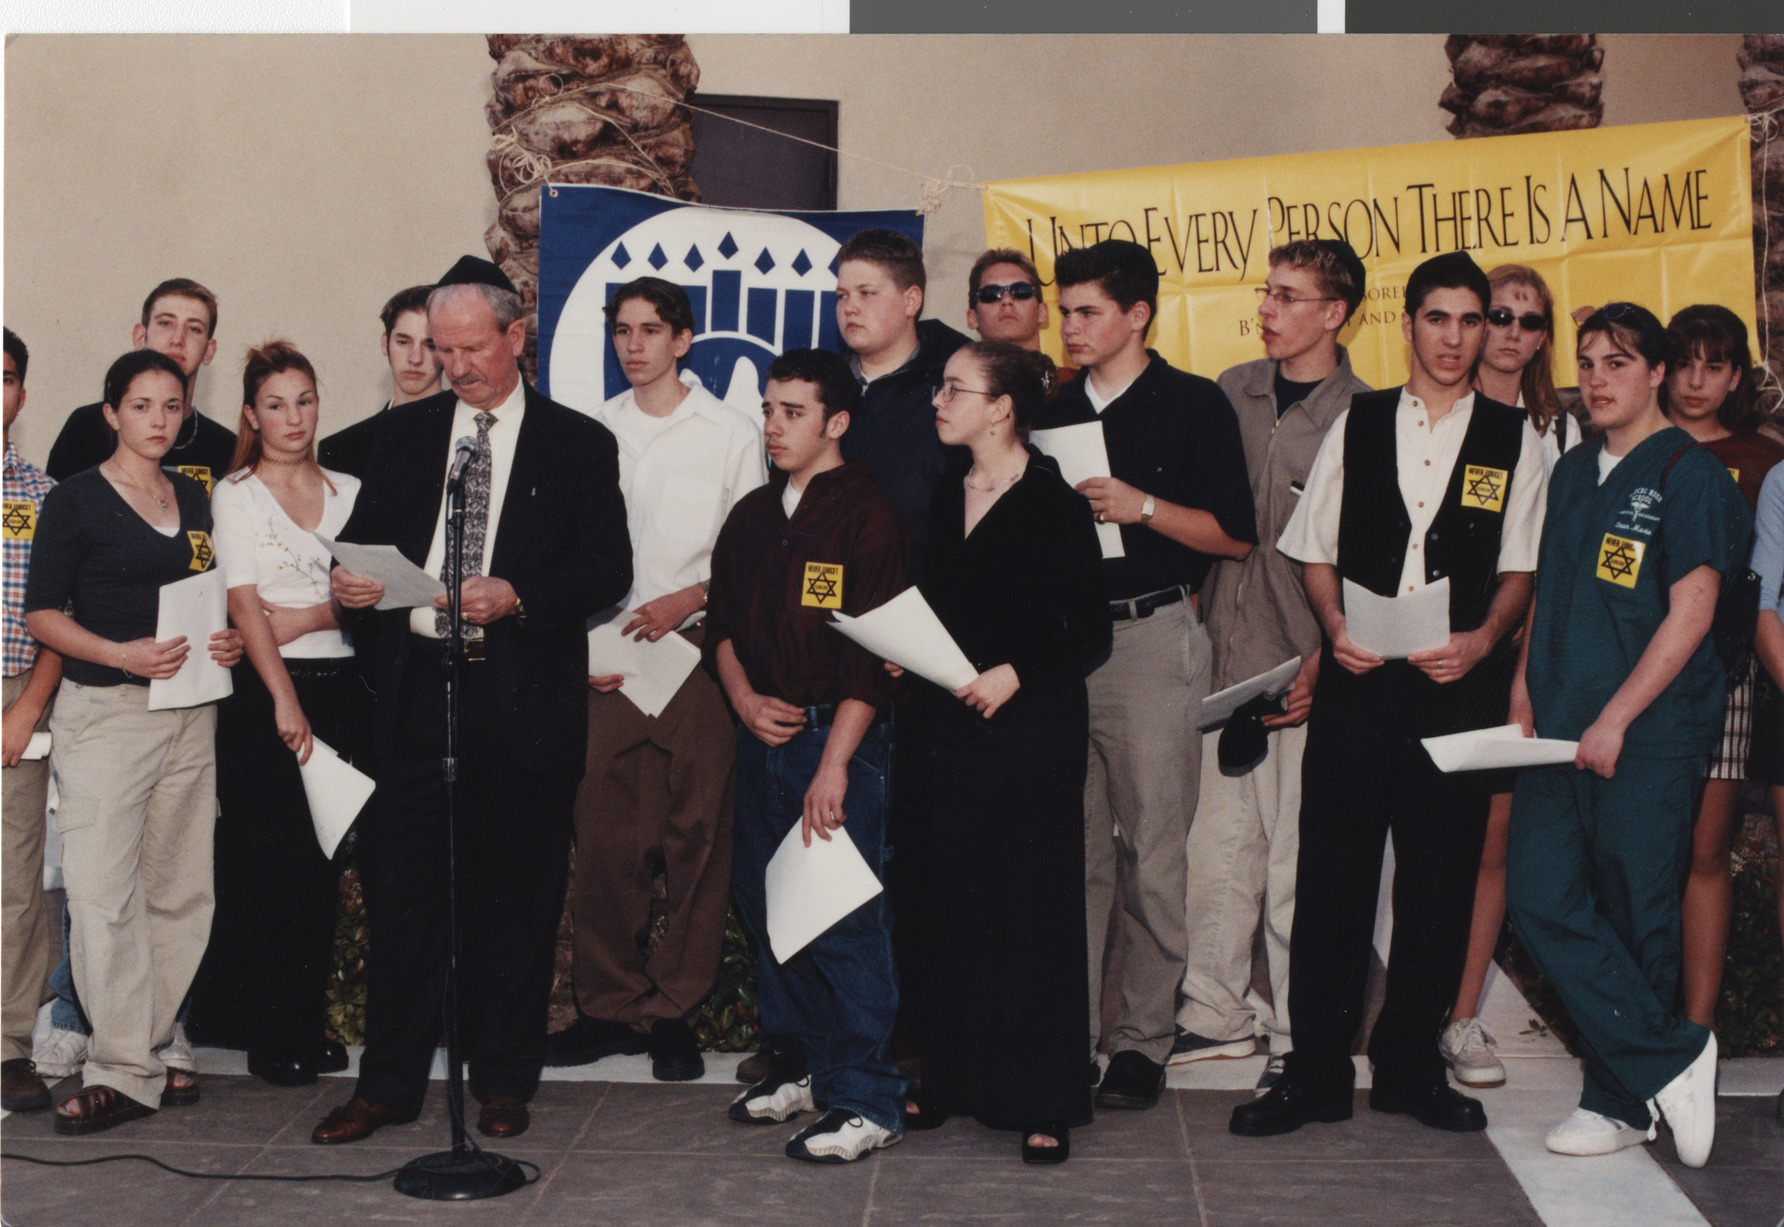 Photograph of Congregation Ner Tamid during Yom Ha' Shoa (Holocaust Remembrance Day), 1999